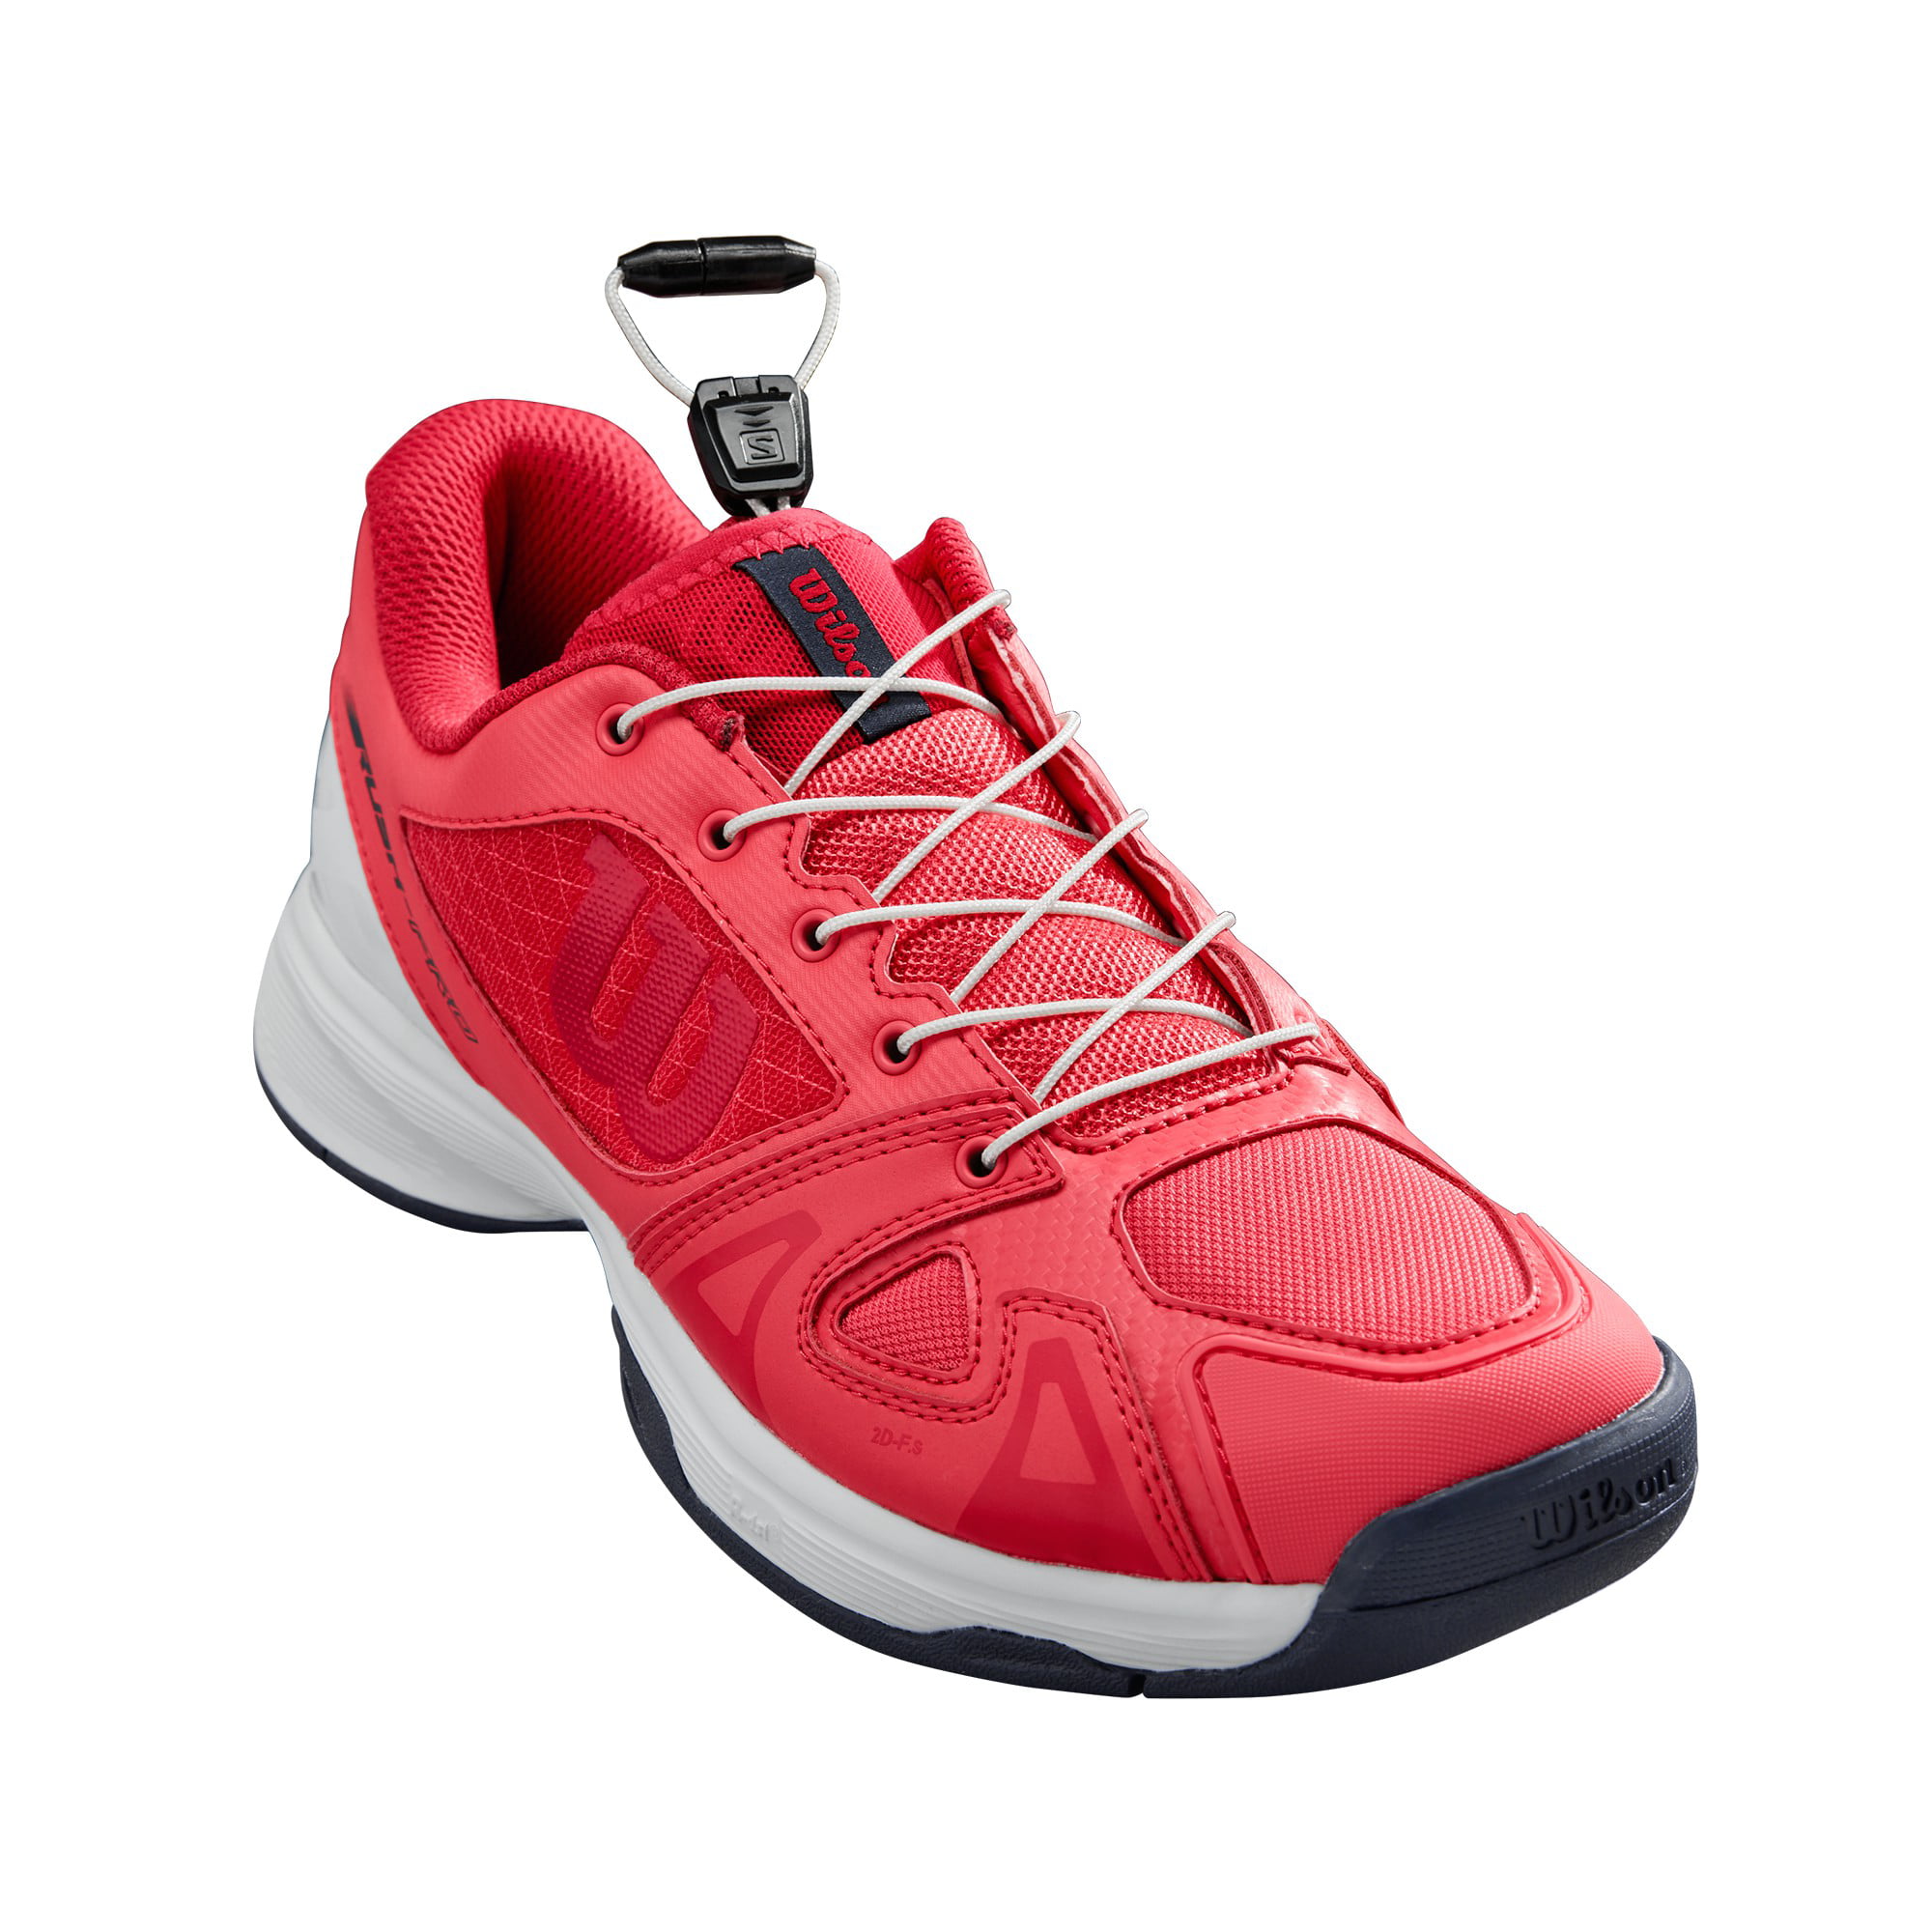 for All Surfaces All Types of Player Wilson Junior/Childrens Tennis Shoes RUSH PRO JR QL 